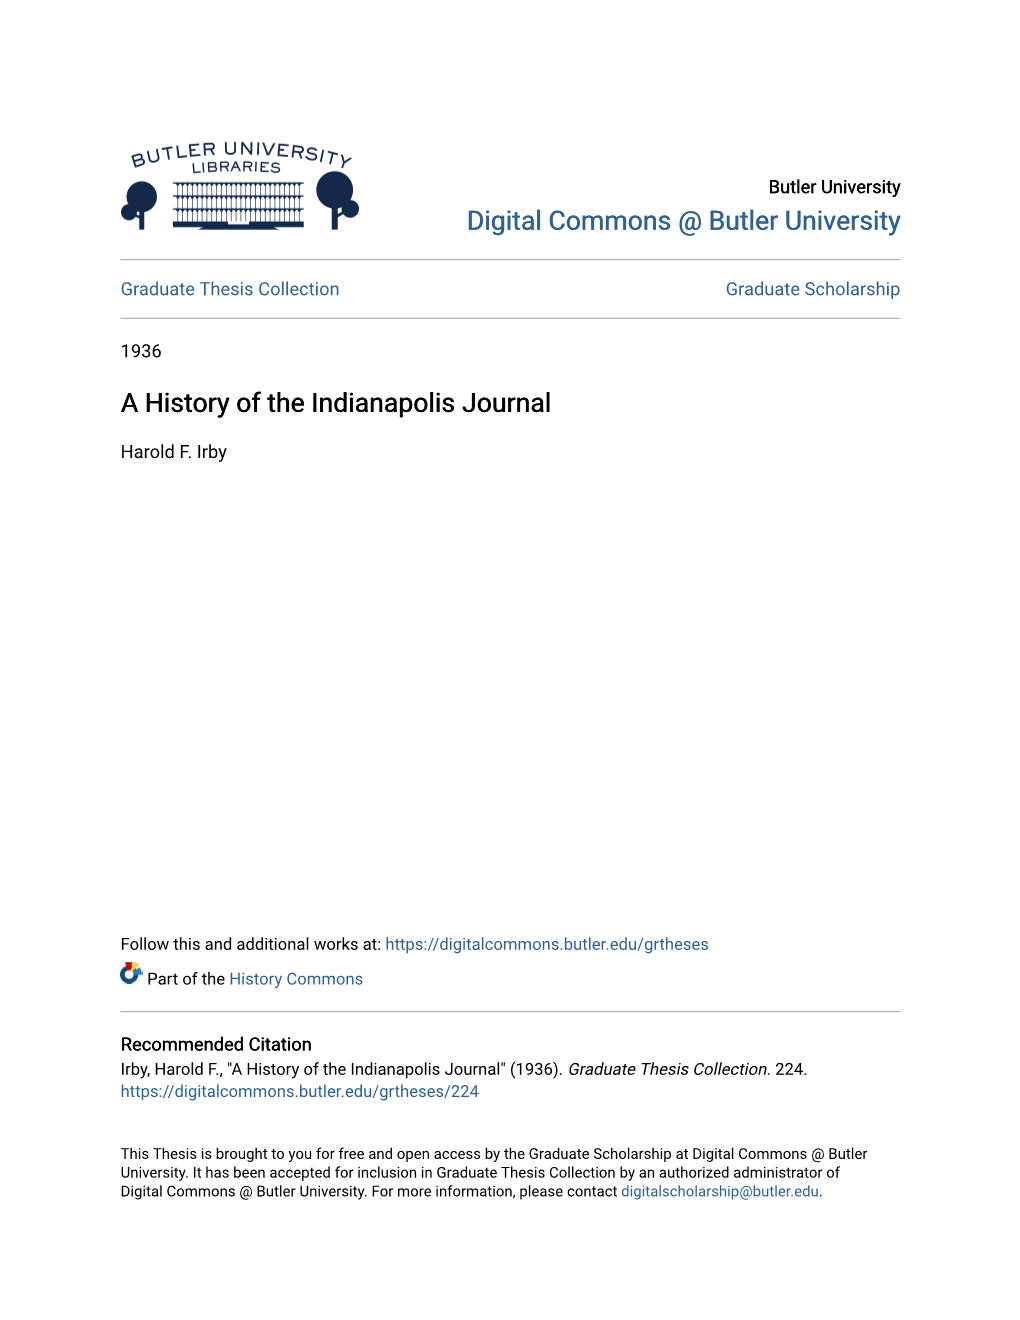 A History of the Indianapolis Journal